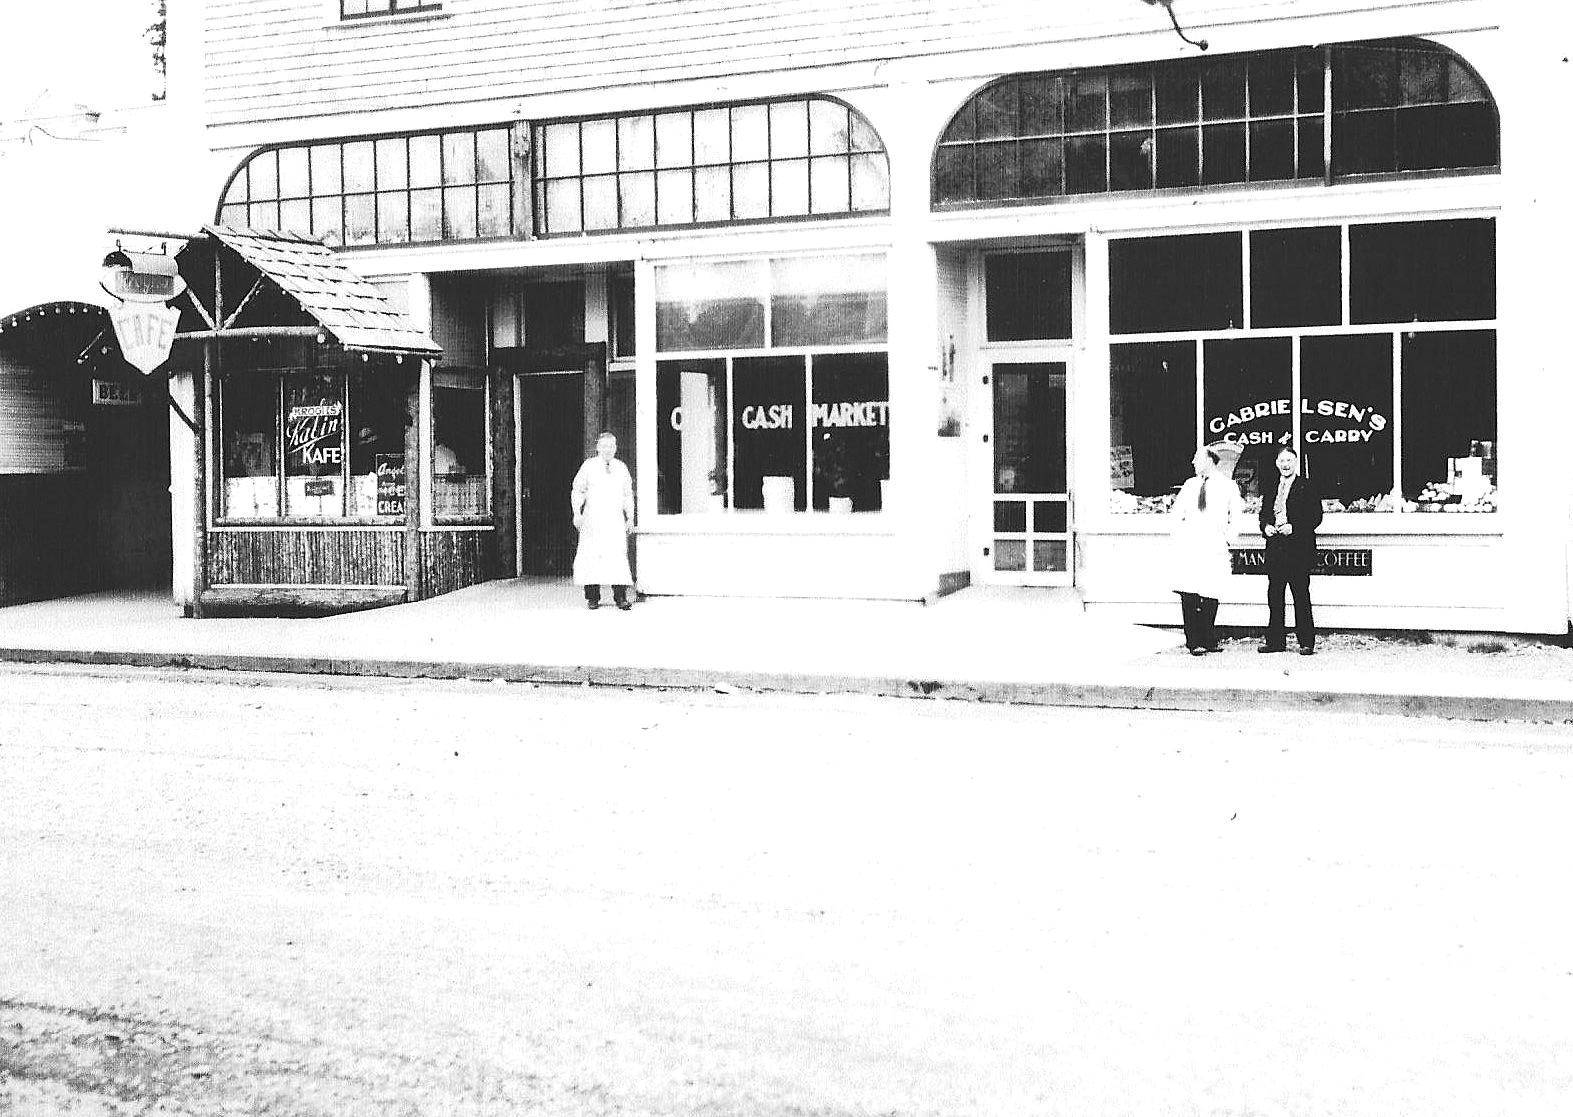 September picture from the past                                Do you know what 1935 building this is? Hint: It is west of Port Angeles. It is no longer standing. If you know or have a guess, email Alice Alexander at bretches1942@gmail.com or write to her at 204 W. Fourth St., Apt. 14, Port Angeles, WA 98362, and she will use your comments in her Oct. 2 column.                                Picture from the Past                                Do you know what 1935 building this is? Hint: It is west of Port Angeles. It is no longer standing. If you know or have a guess, email Alice Alexander at bretches1942@gmail.com or write to her at 204 W. Fourth St., Apt. 14, Port Angeles, WA 98362, and she will use your comments in her Oct. 2 column.